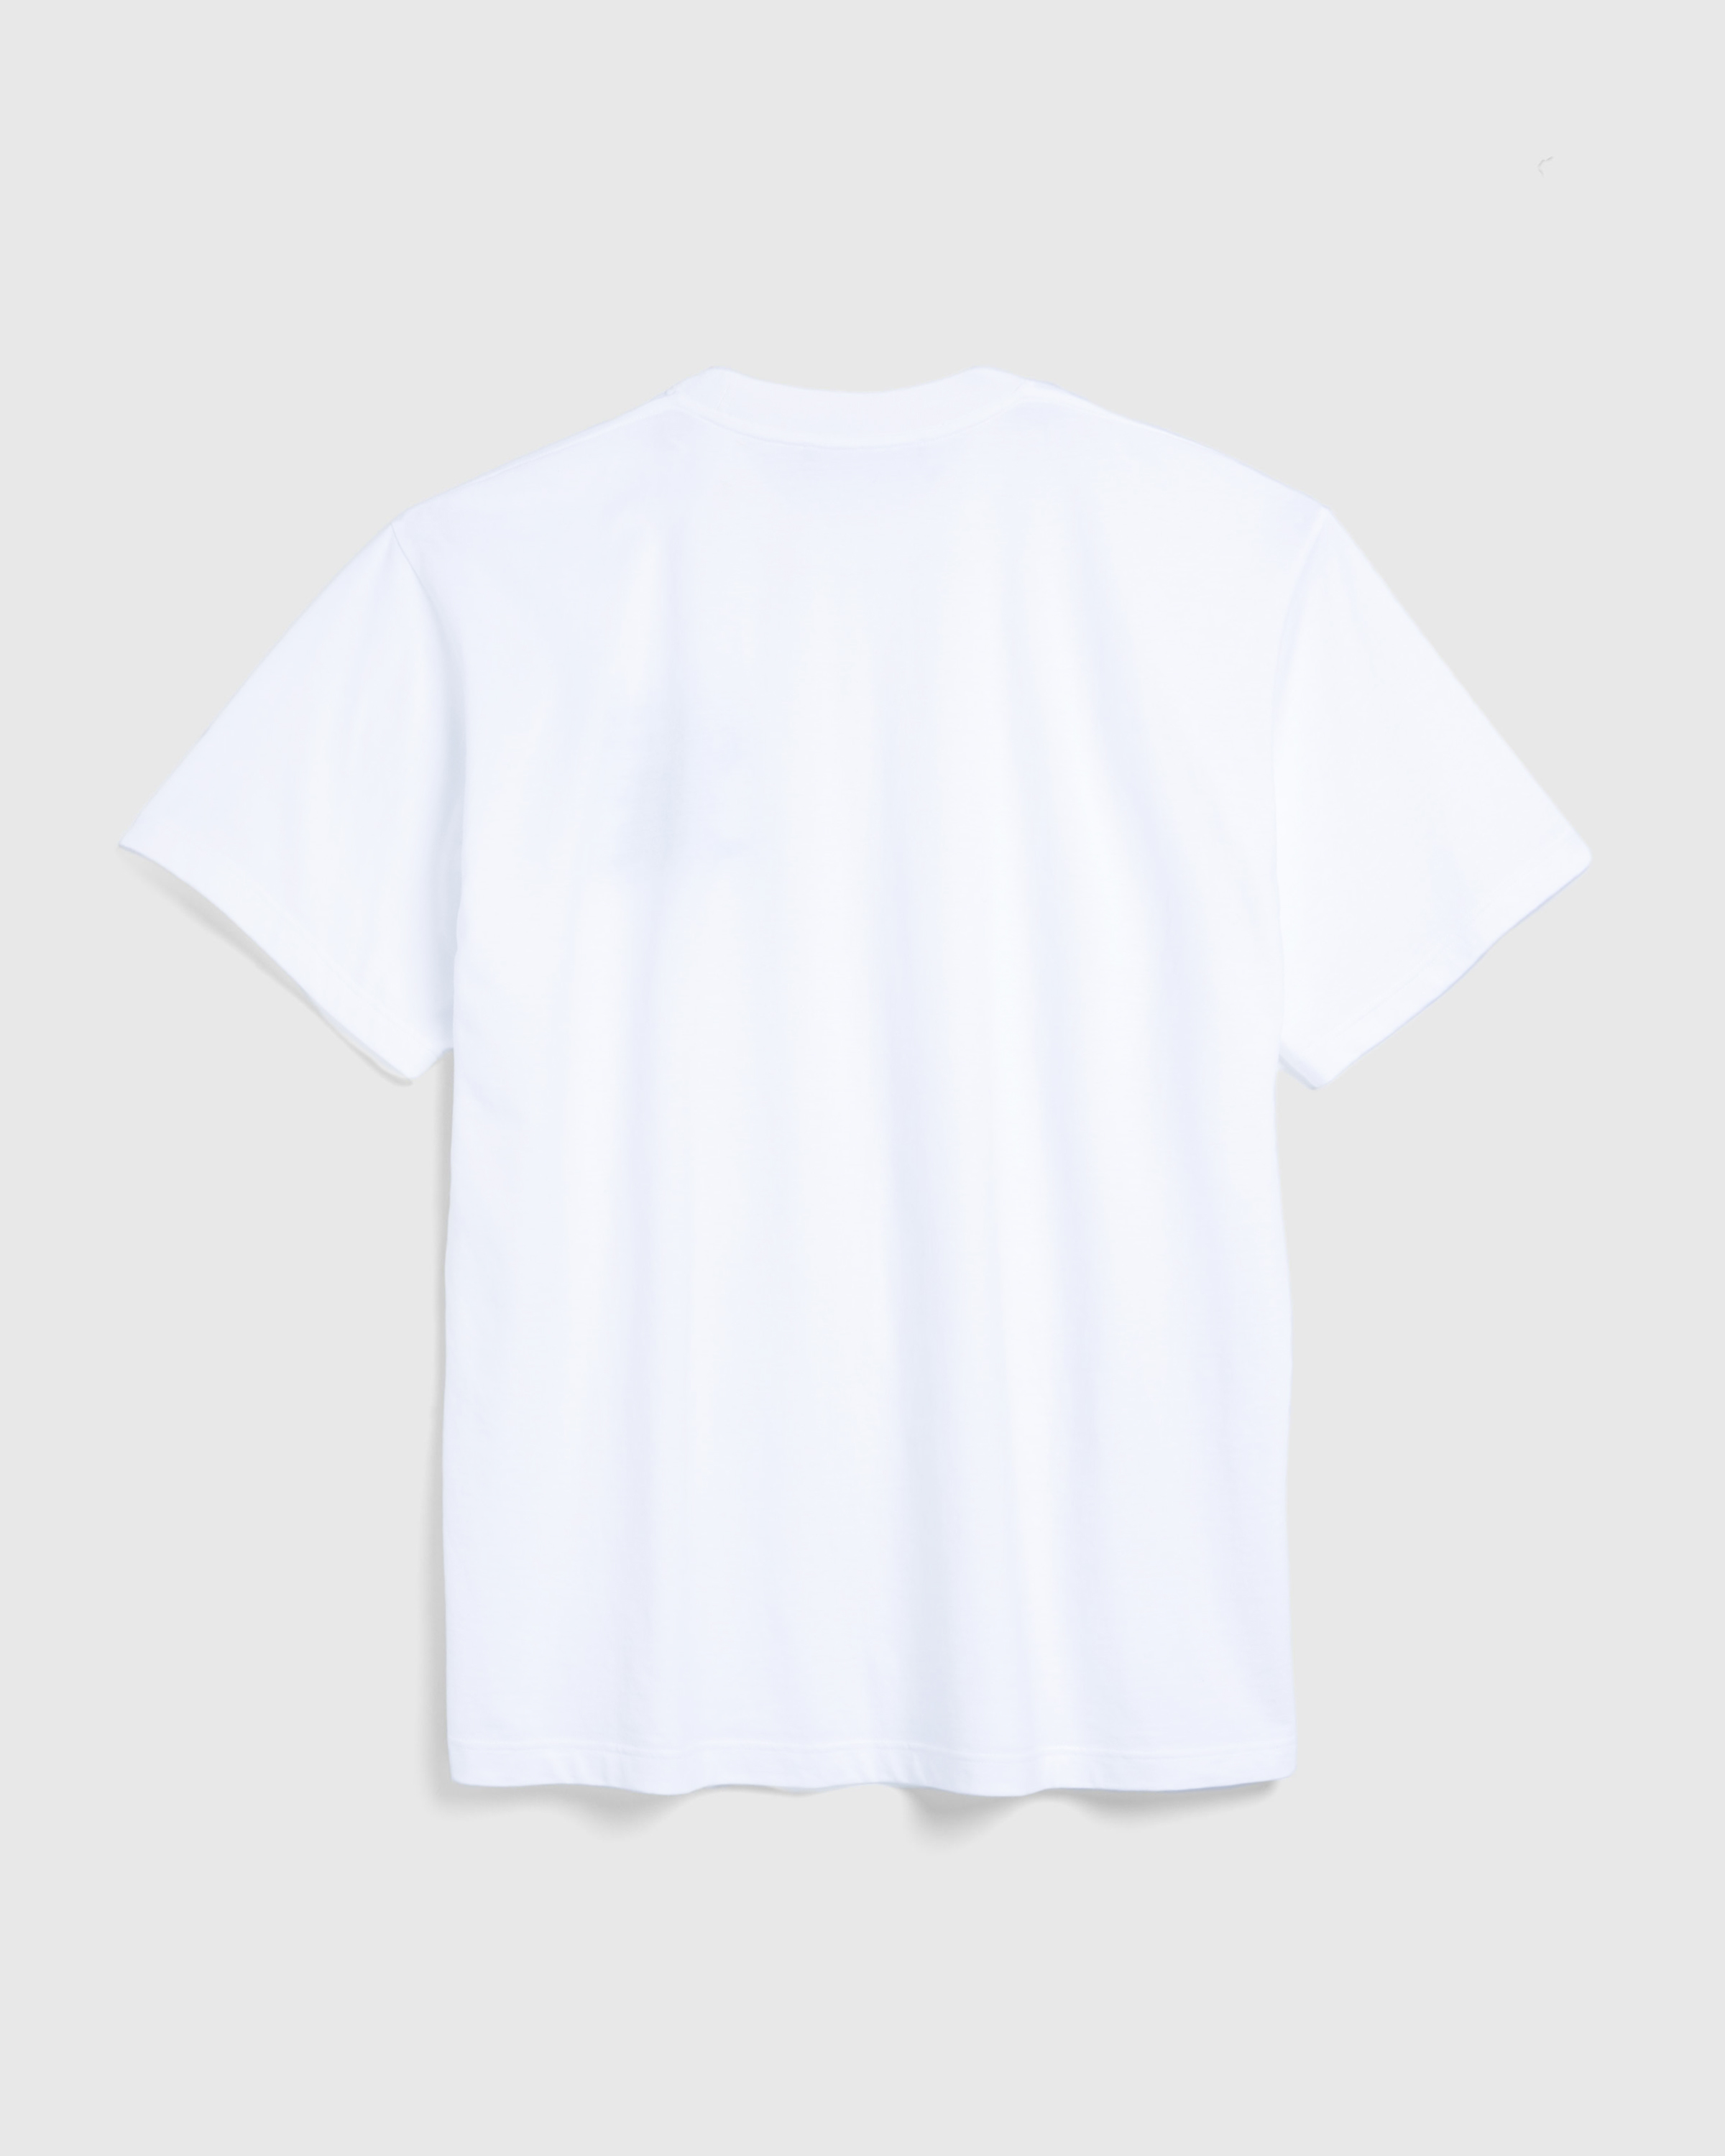 Y/Project x Highsnobiety – Not In Paris T-Shirt White - T-Shirts - White - Image 3